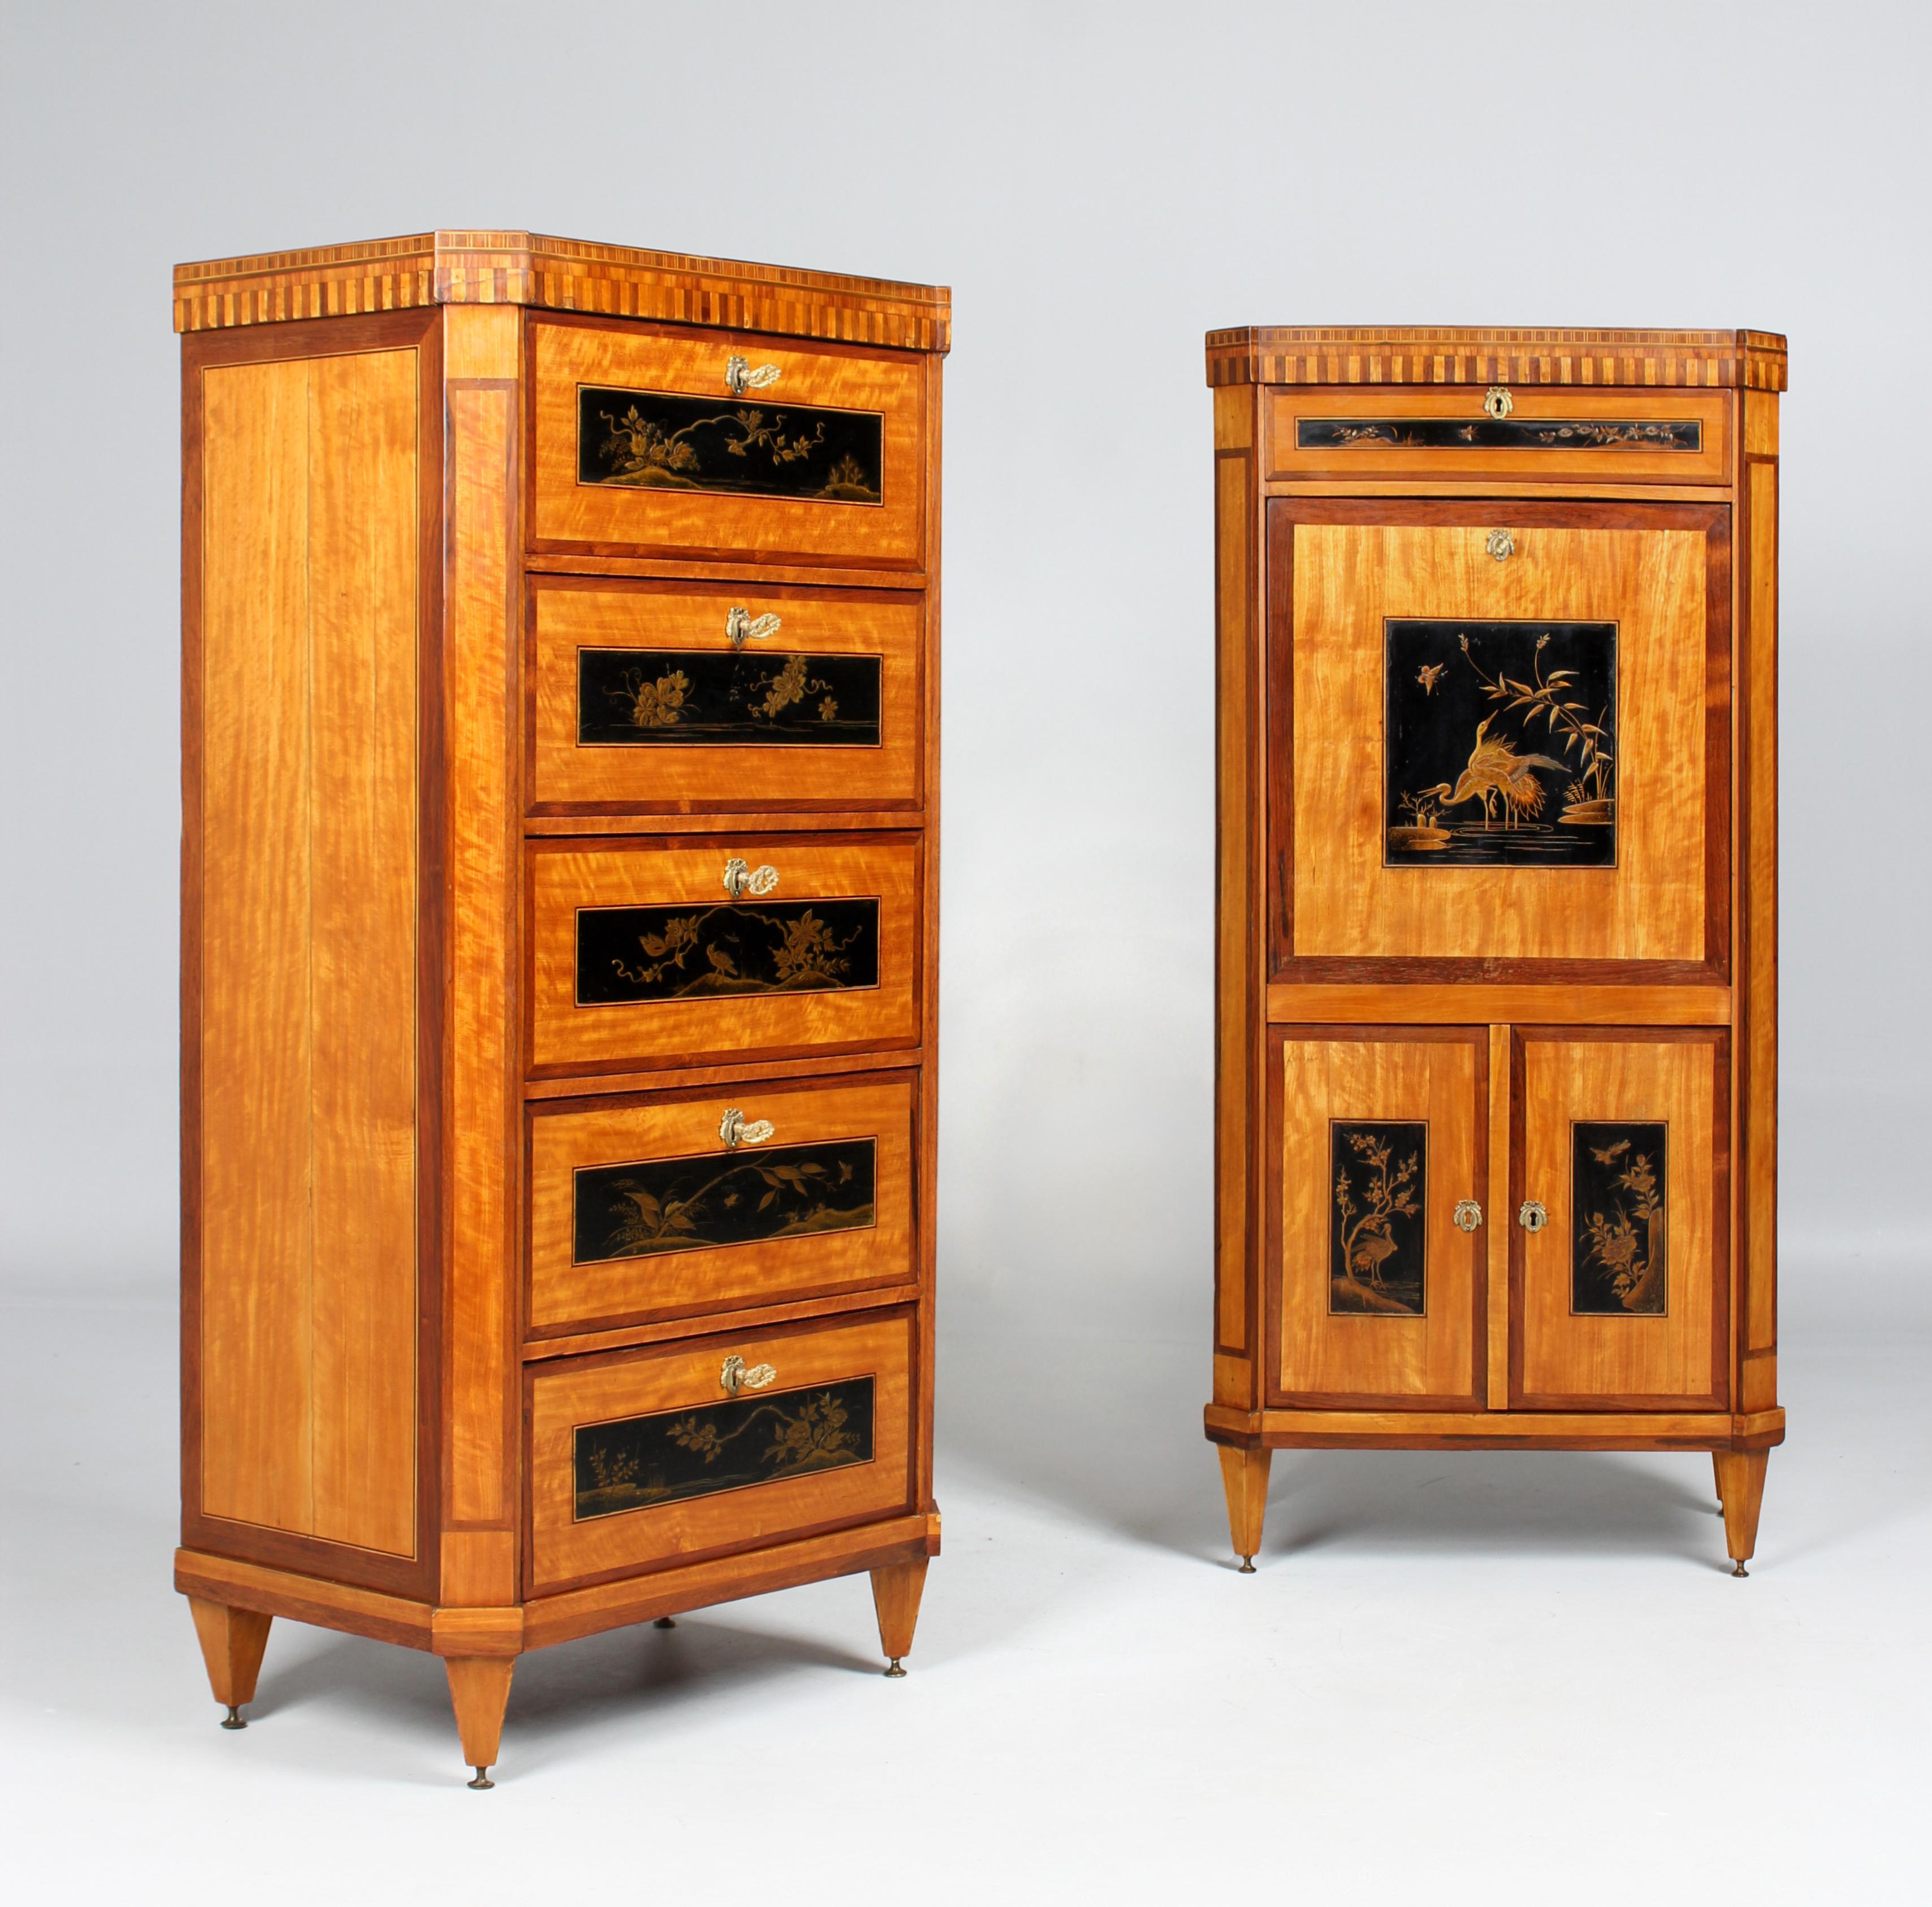 Pair of chinoiserie furniture - secretary and chiffonier

The Netherlands
Satinwood and others, lacquered panels
around 1890

Dimensions: H x W x D: 130 x 63 x 39 cm

Description:
Very rare pair of furniture, consisting of a small secretary and a